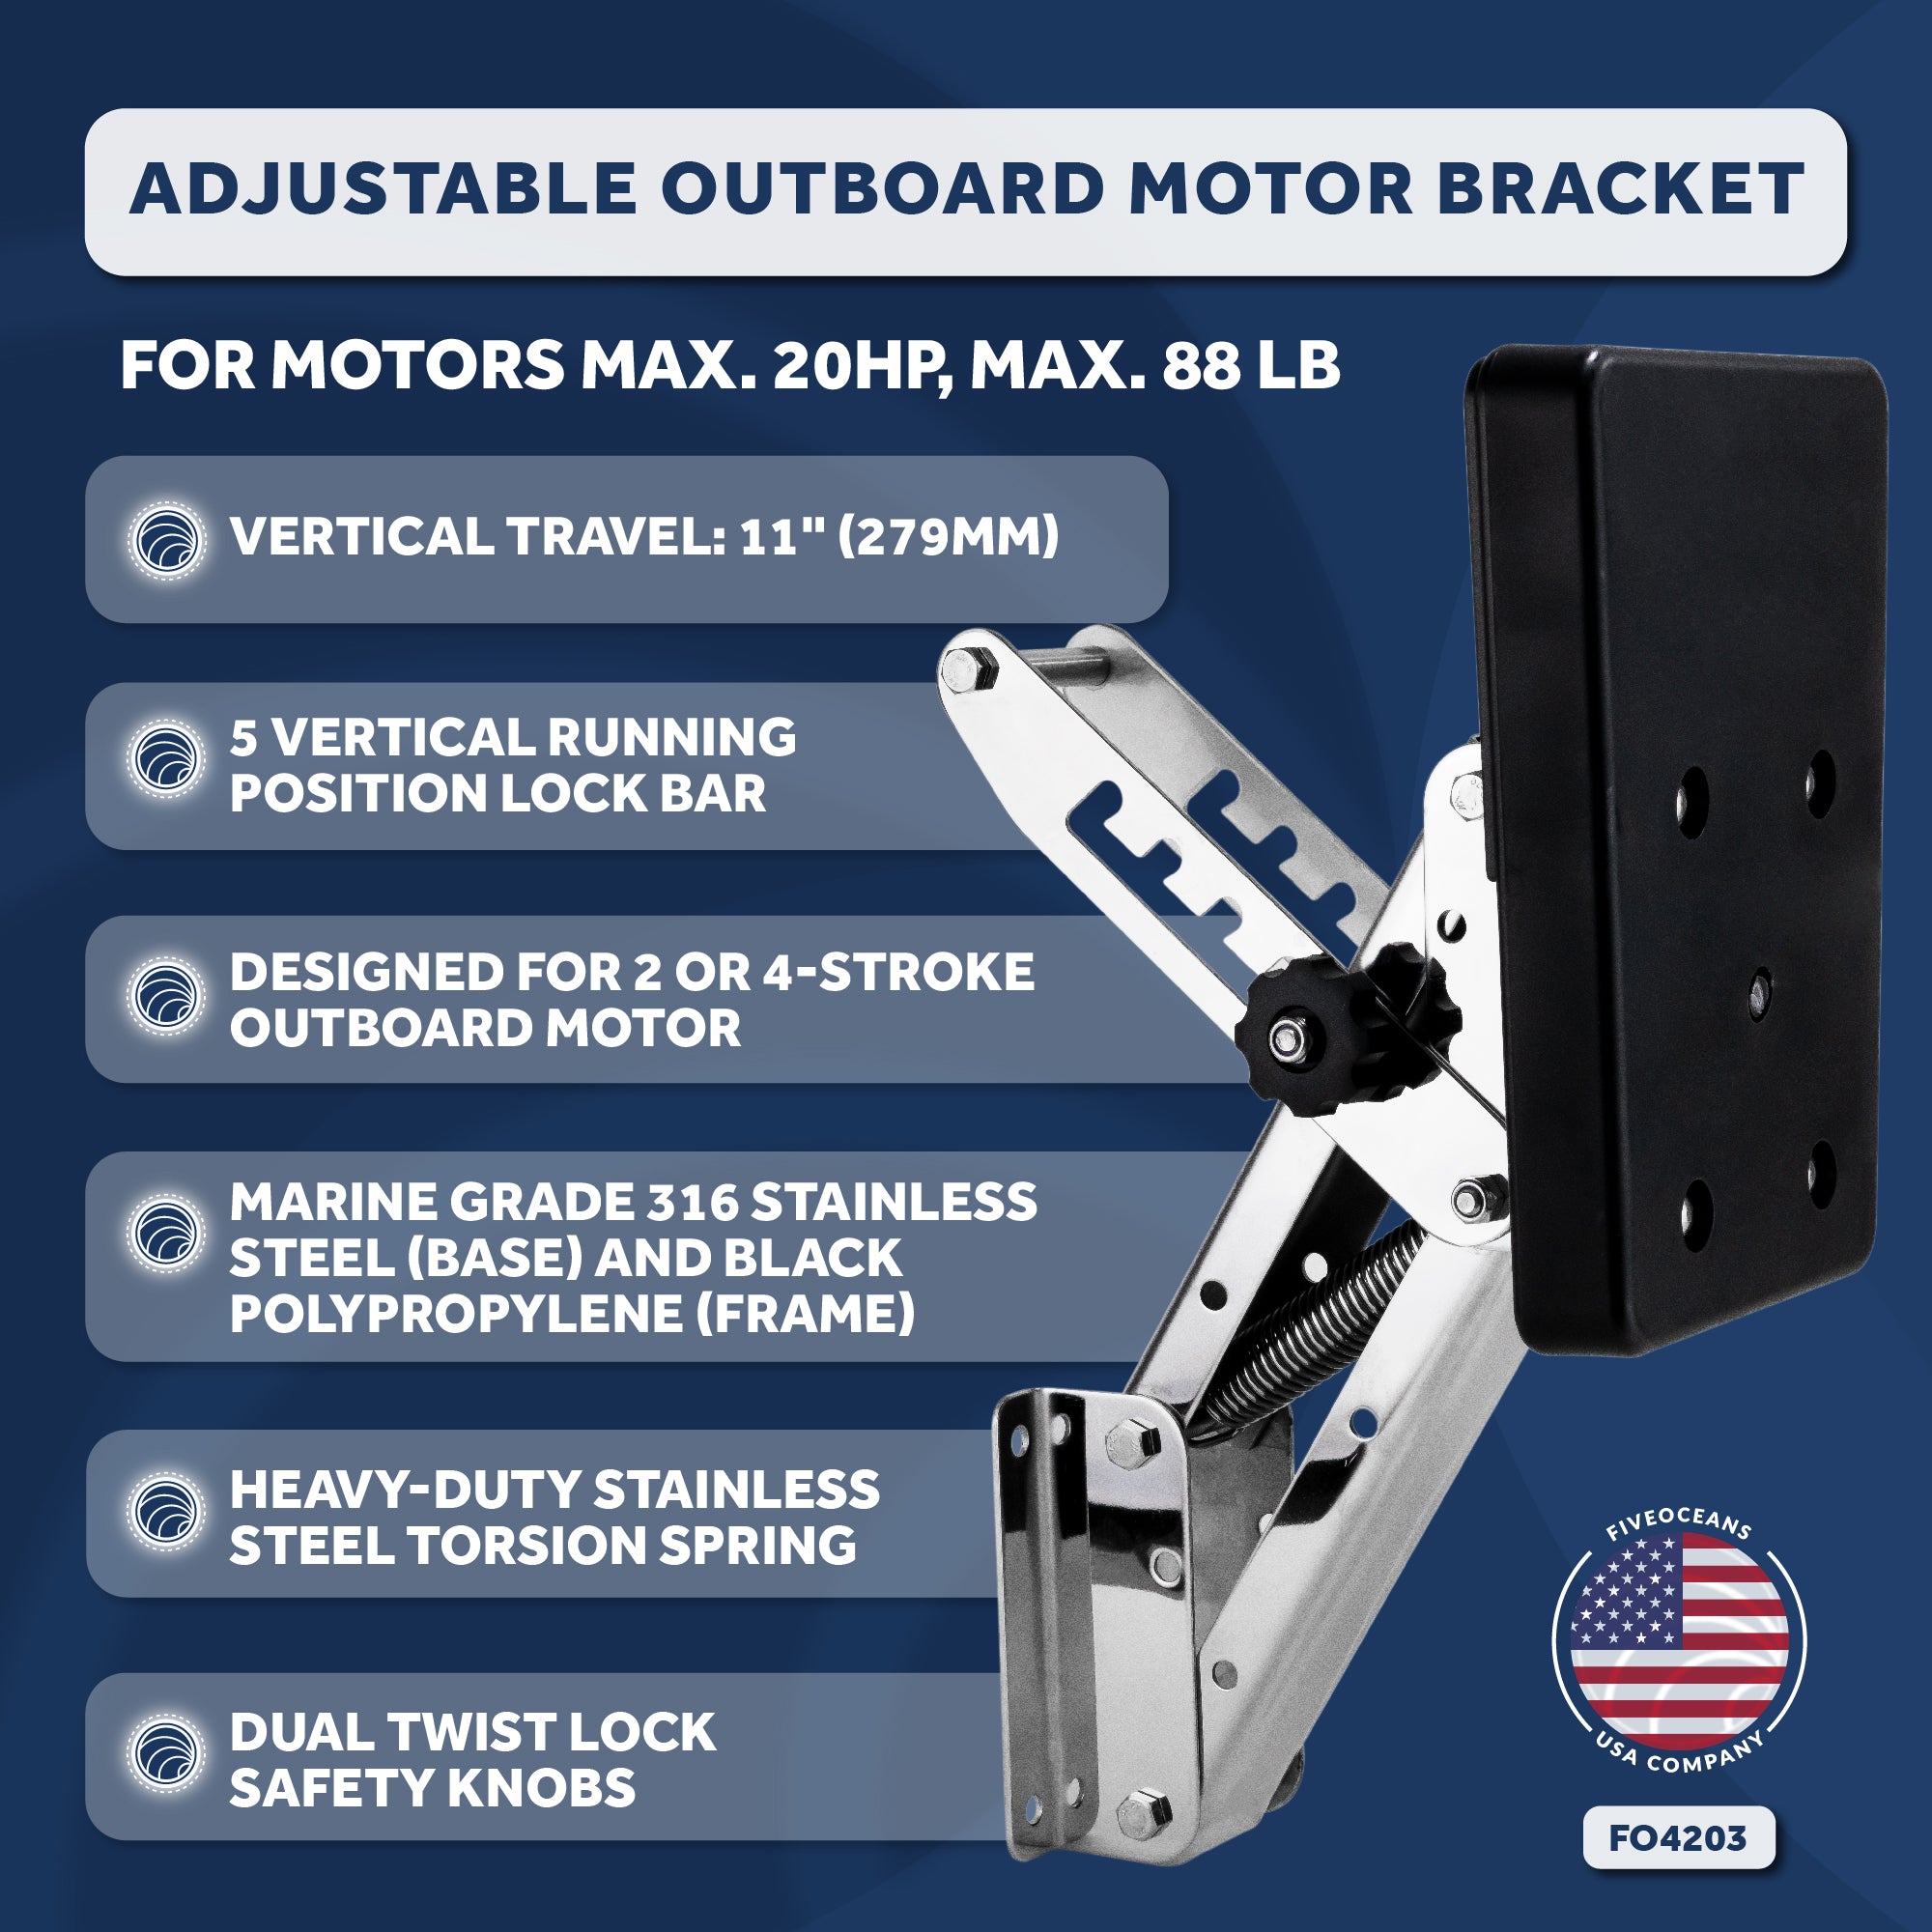 Adjustable Outboard Motor Bracket, Max. 20 Hp, Max. 88 Lb, 11-Inch of Travel, 316 Stainless Steel, Black Board - FO4204